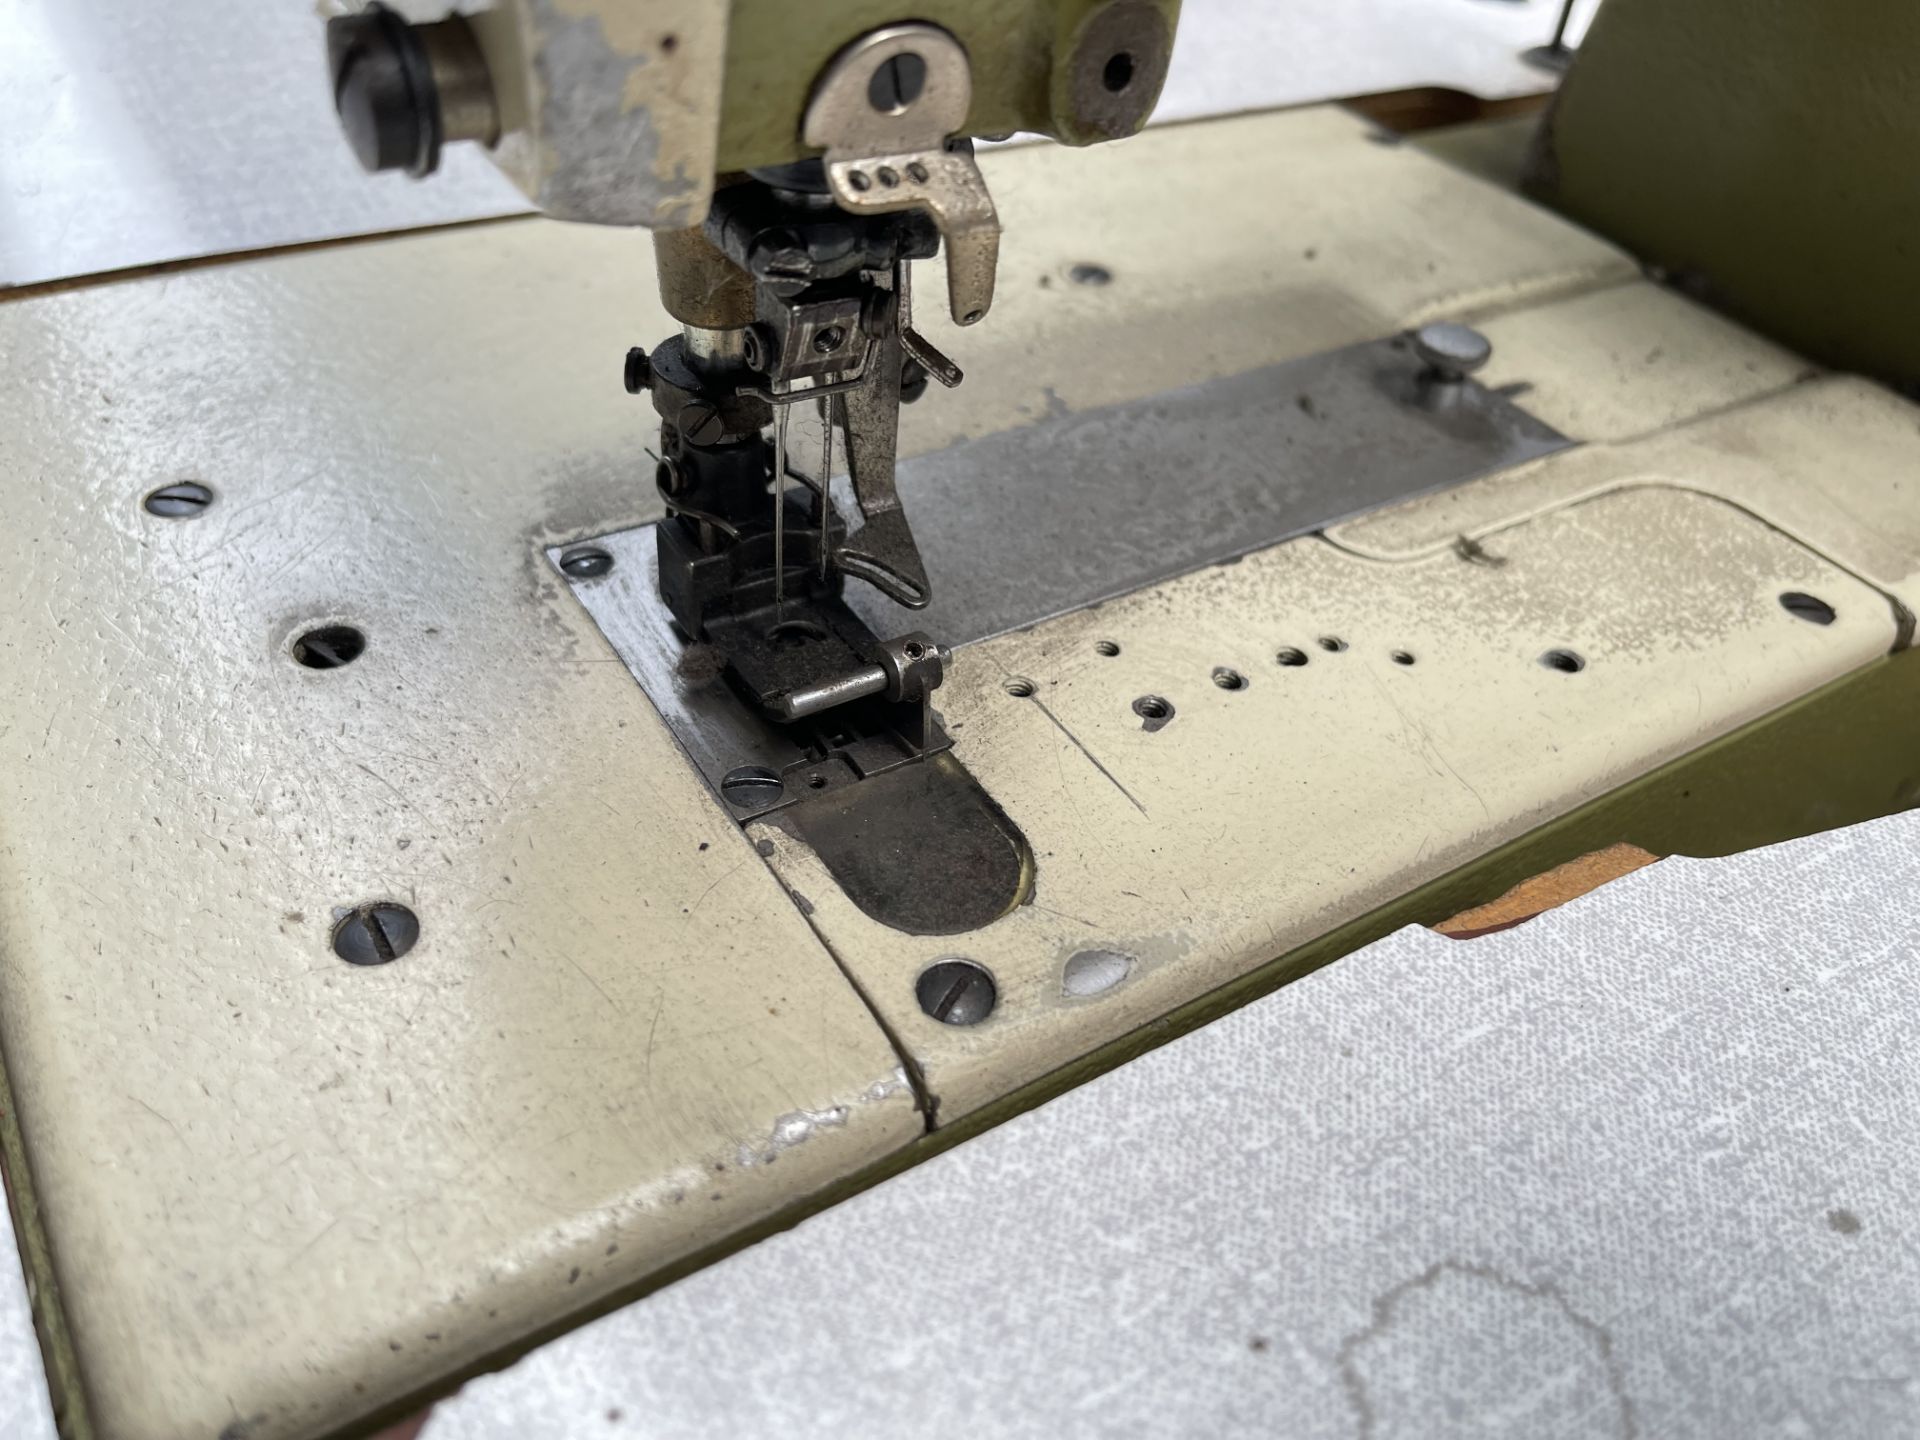 Rimoldi 263-46-3MD-05 Industrial Sewing machine. S/No 634354 - Image 5 of 8